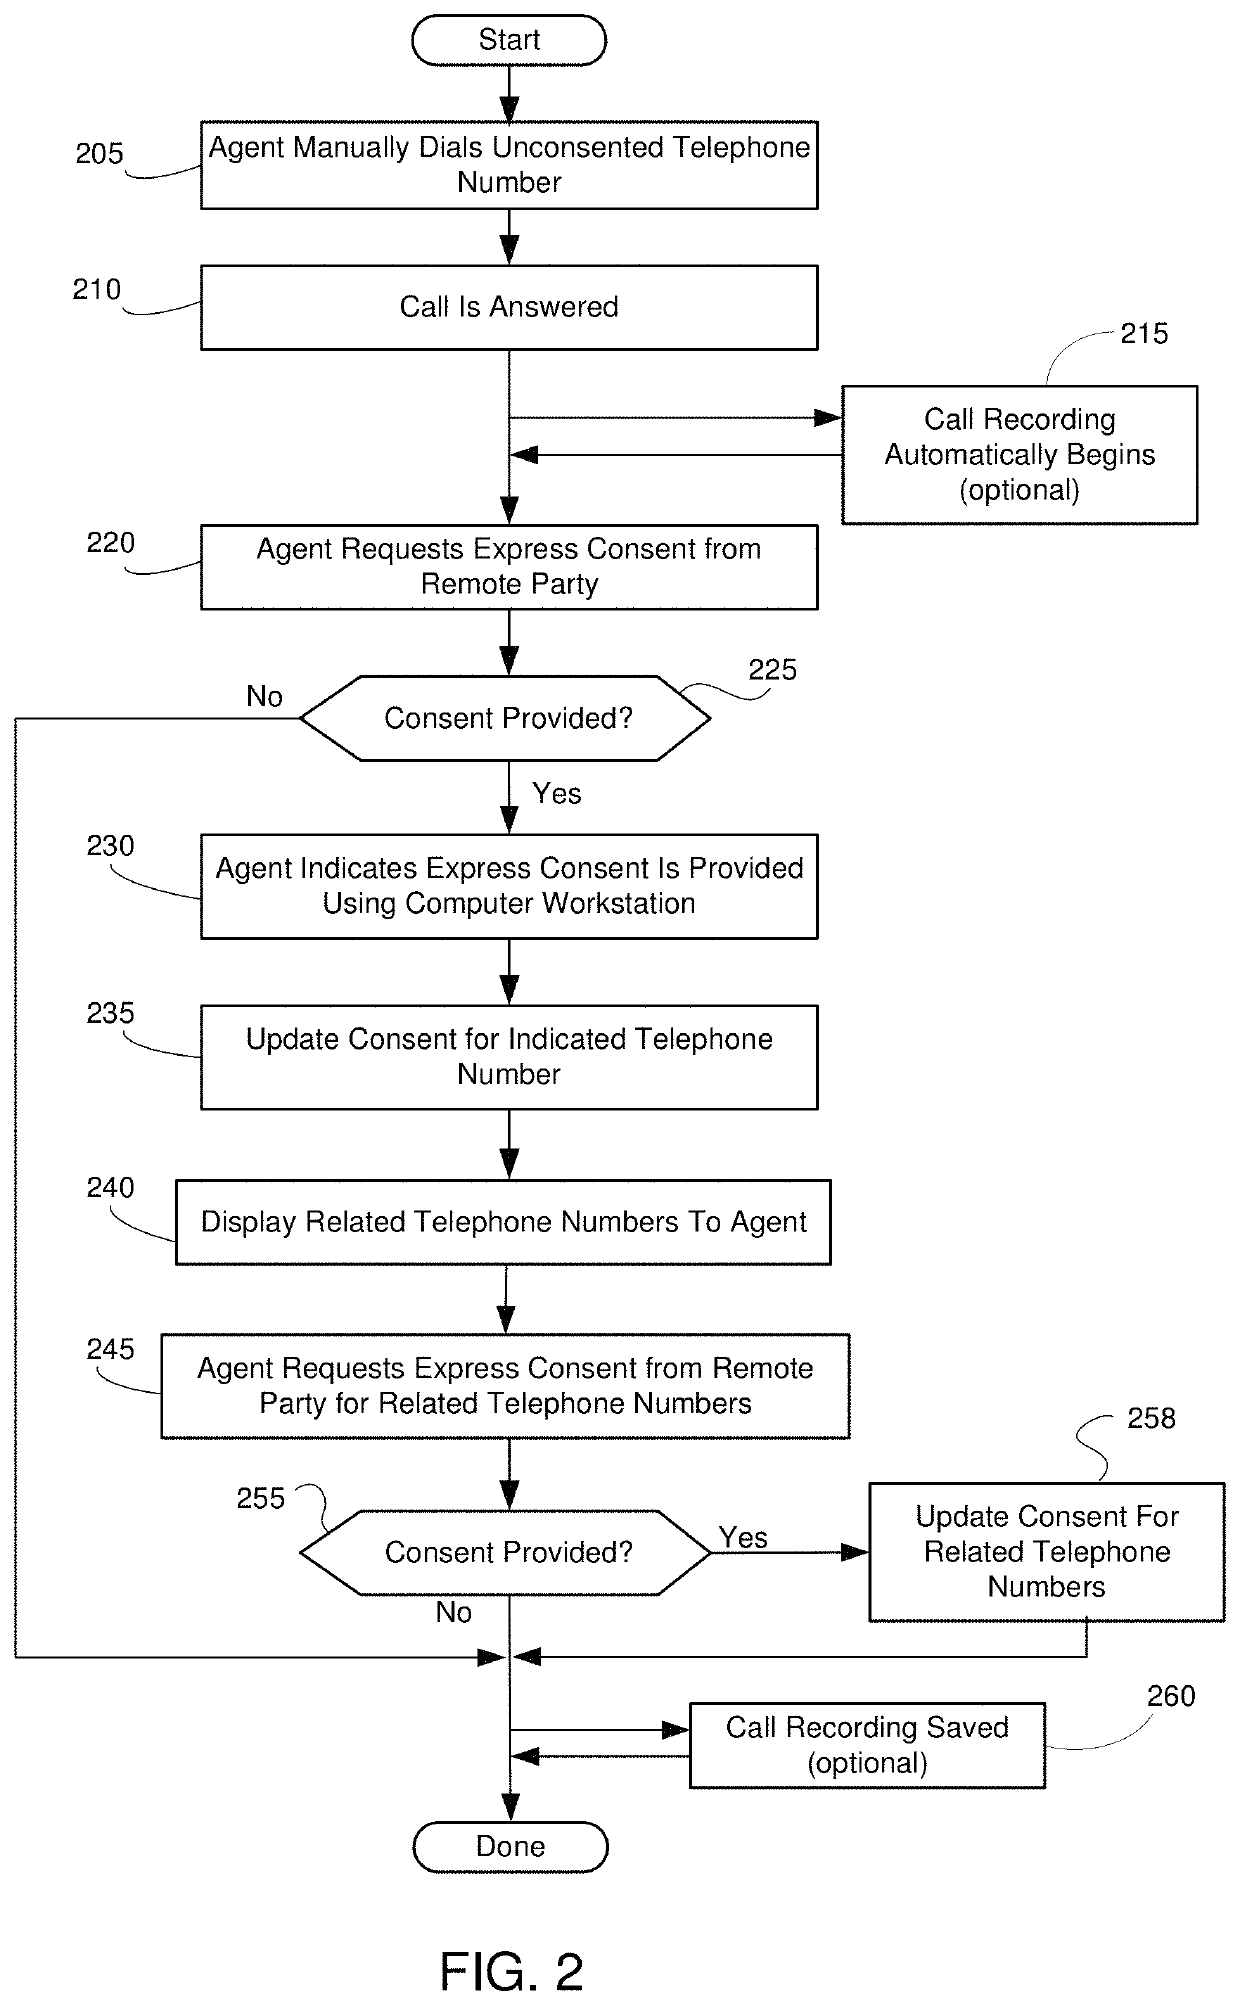 Facilitating agent management of consent for a party associated with multiple telephone numbers